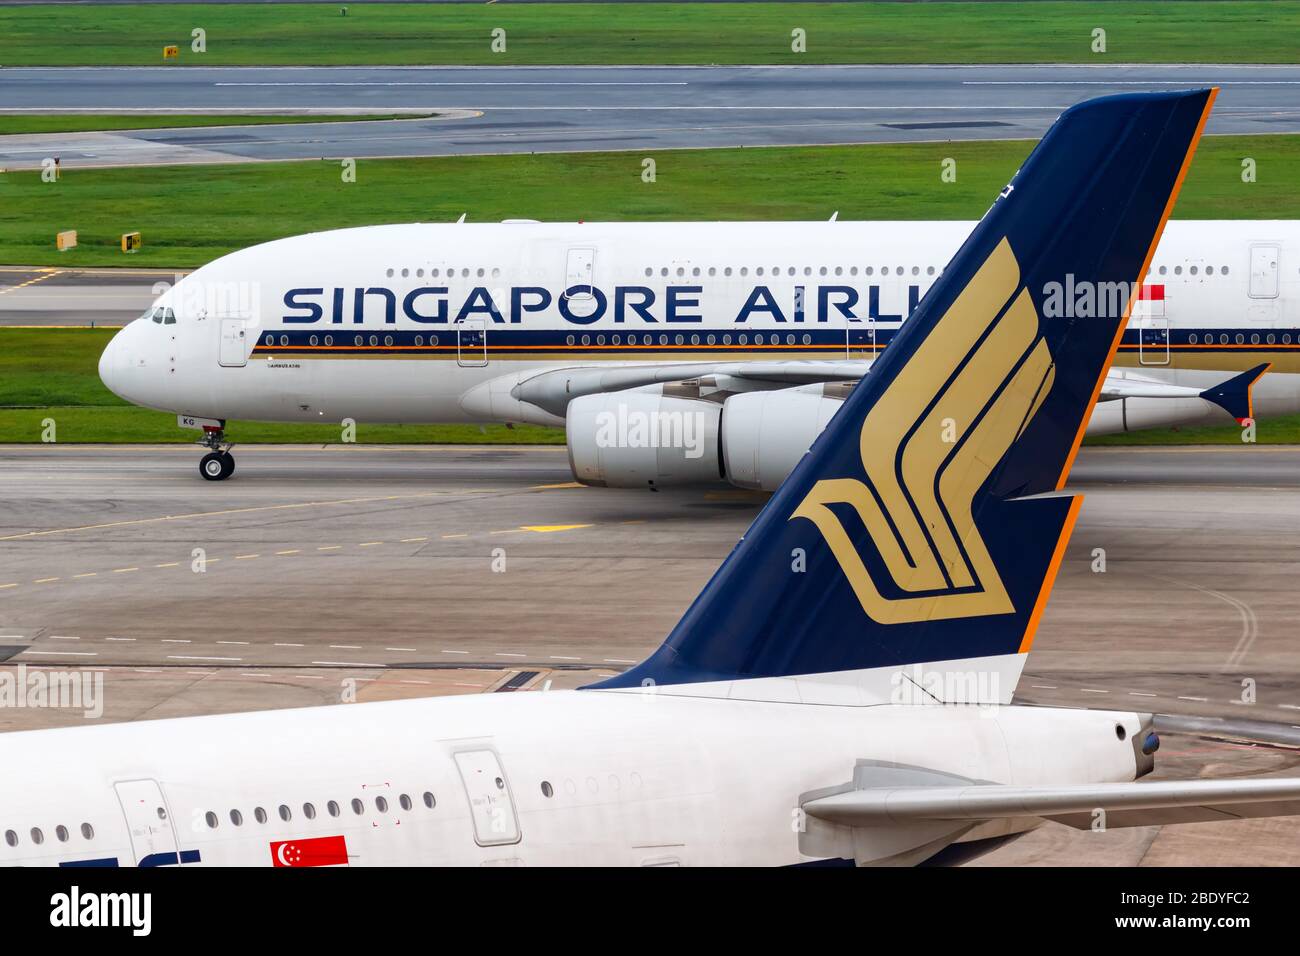 Changi, Singapore – January 29, 2018: Singapore Airlines Airbus A380 airplanes at Changi airport (SIN) in Singapore. Airbus is a European aircraft man Stock Photo